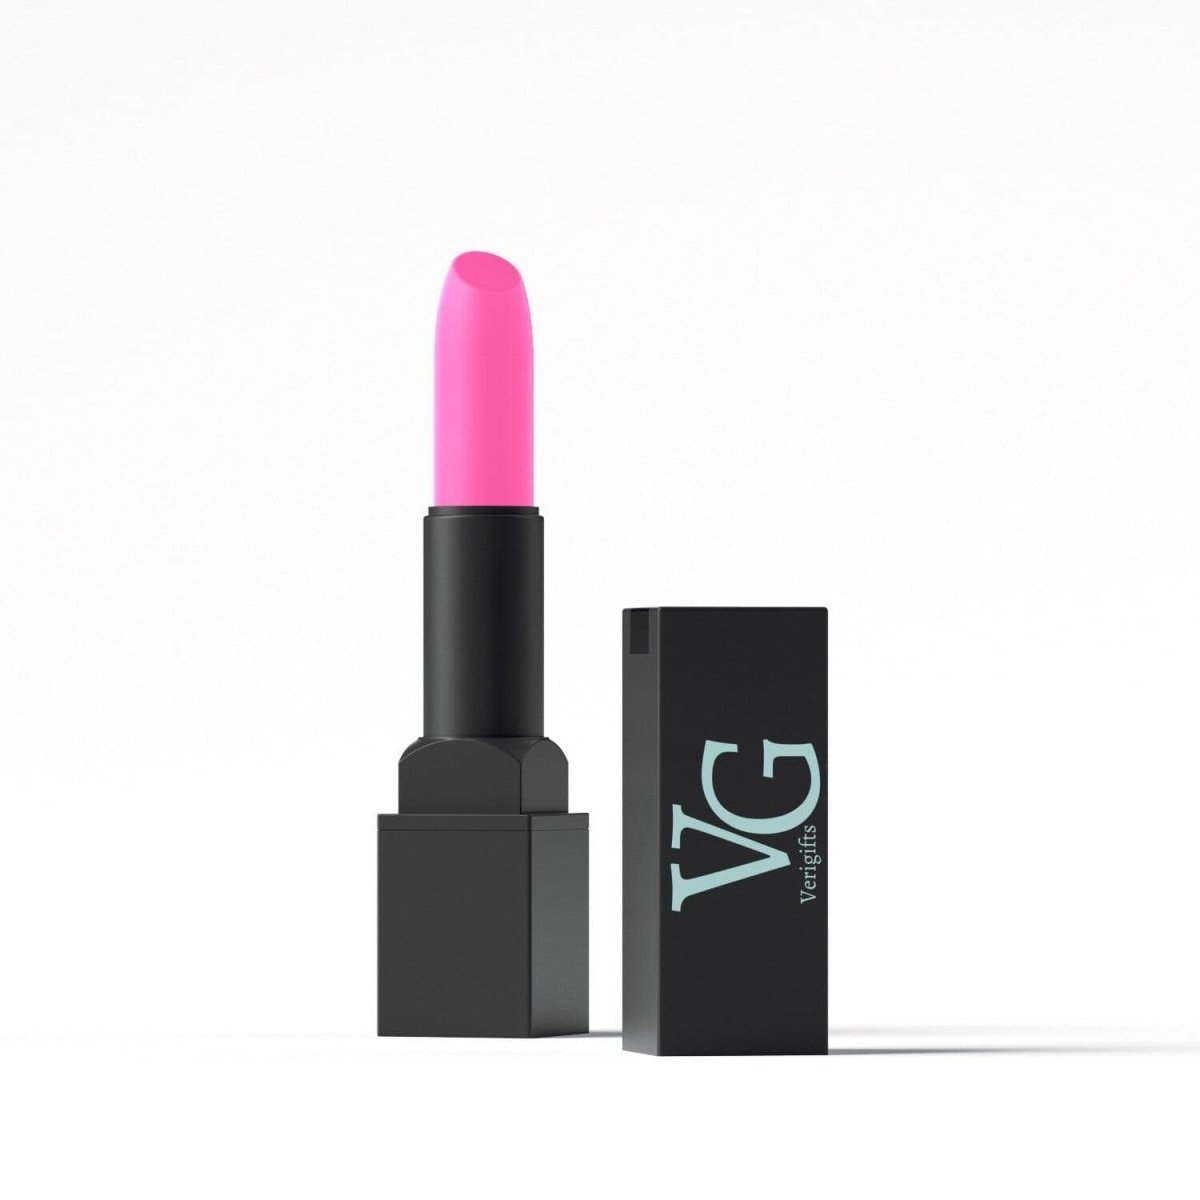 Pink Lipstick from verigifts in a white canv